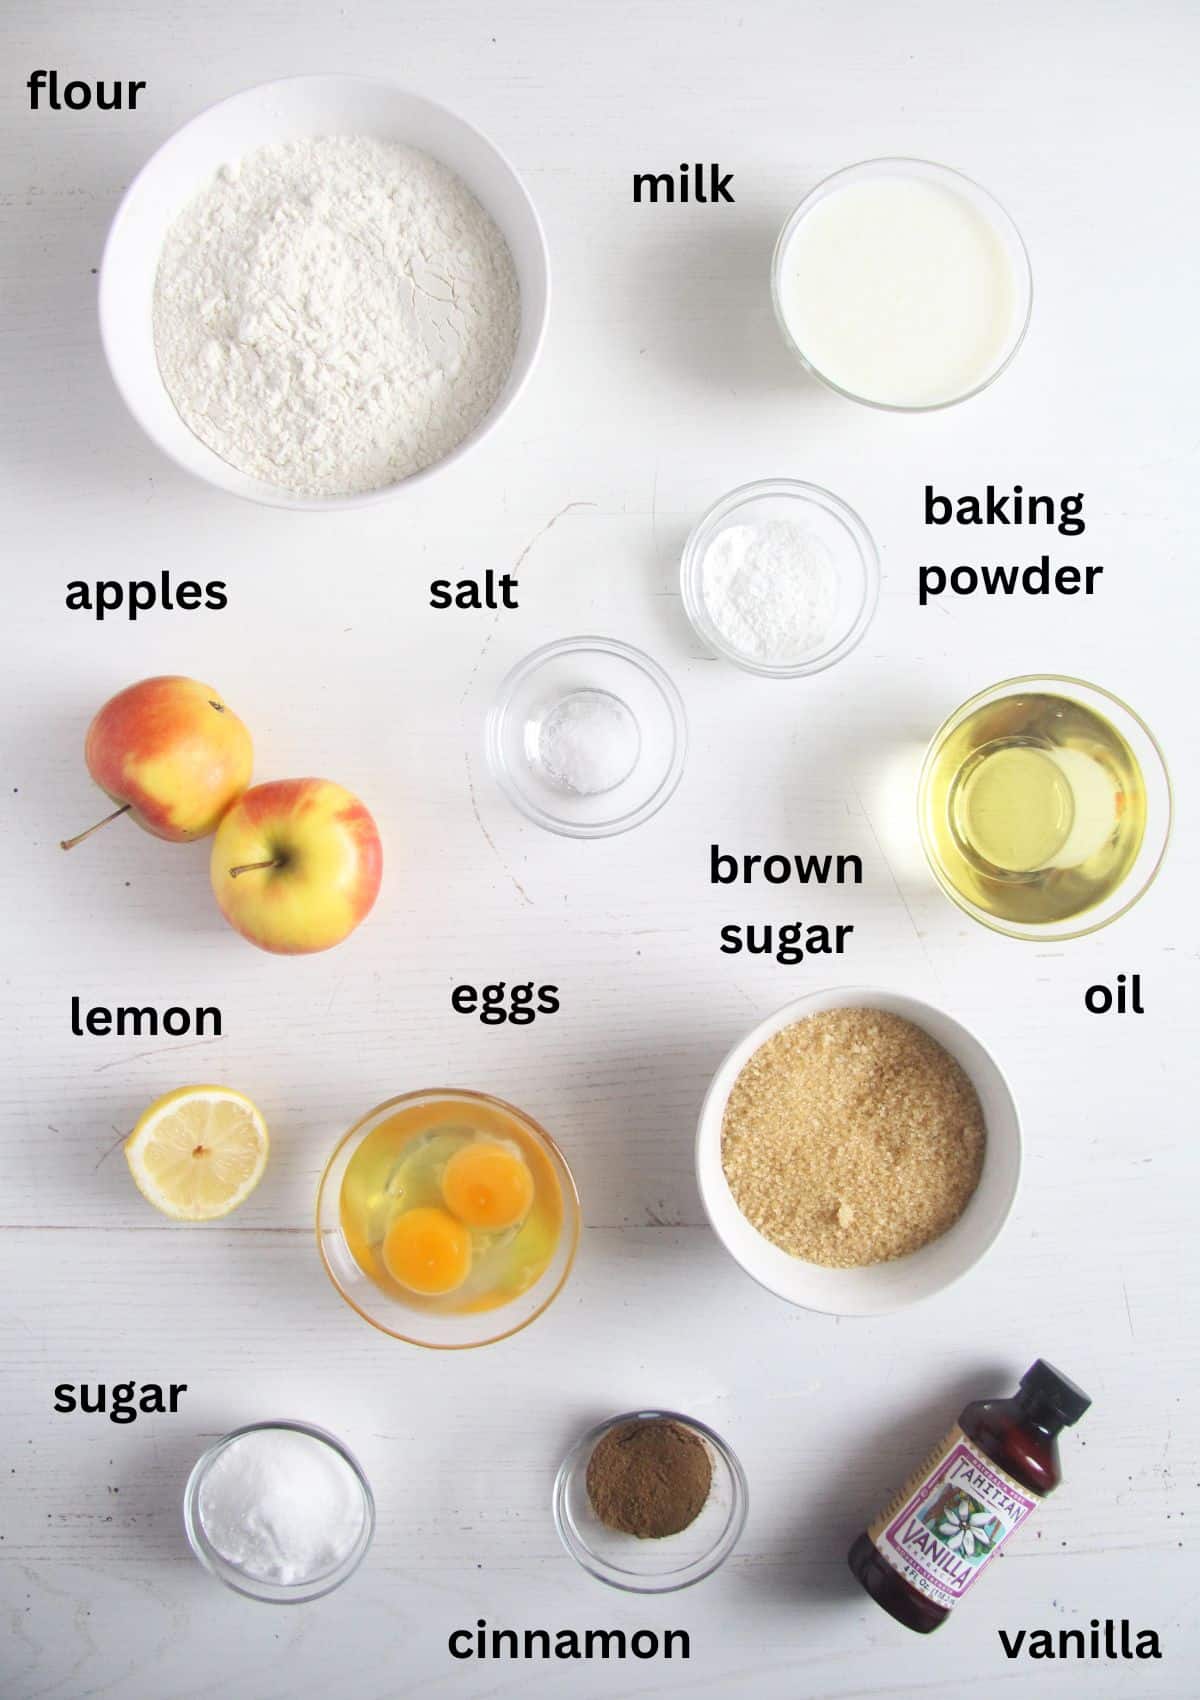 listed ingredients for making apple muffins with oil and cinnamon sugar topping.